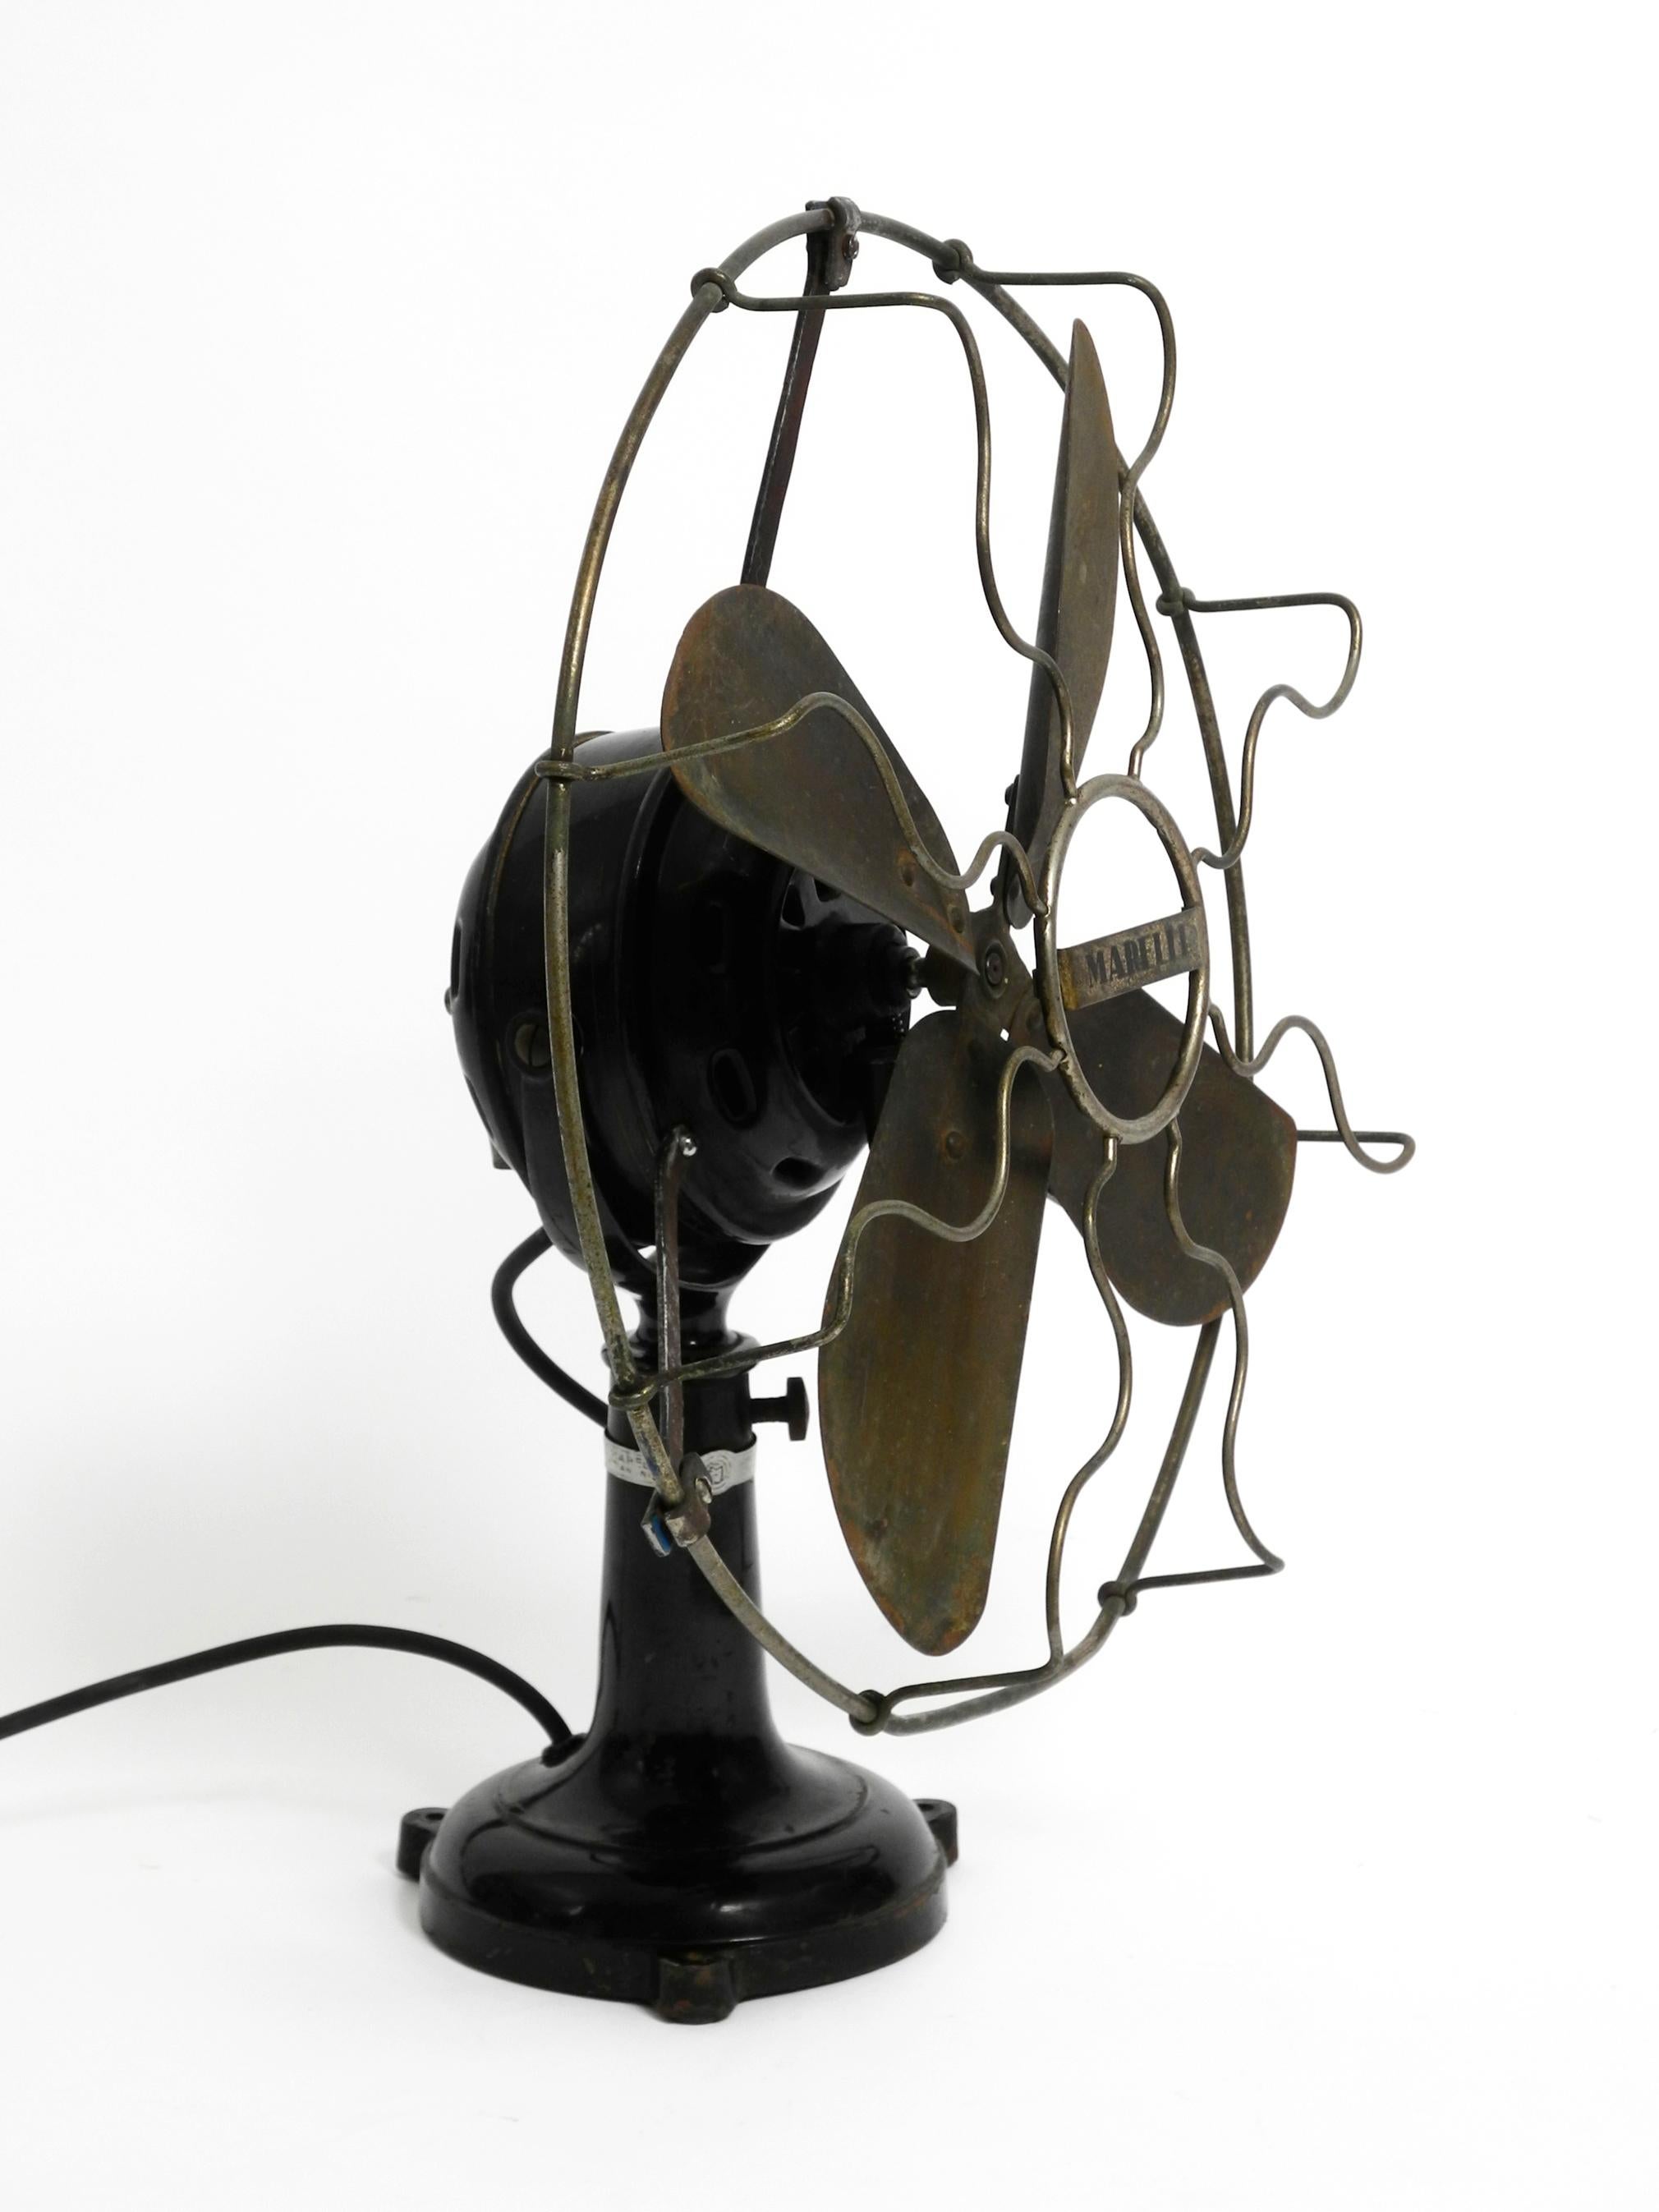 Very beautiful, huge original 1930s industrial metal table fan from Marelli. Made in Italy.
Very good, complete original condition. All parts original and complete.
Wonderful patina for its almost 100 years.
Steplessly tiltable and rotatable and